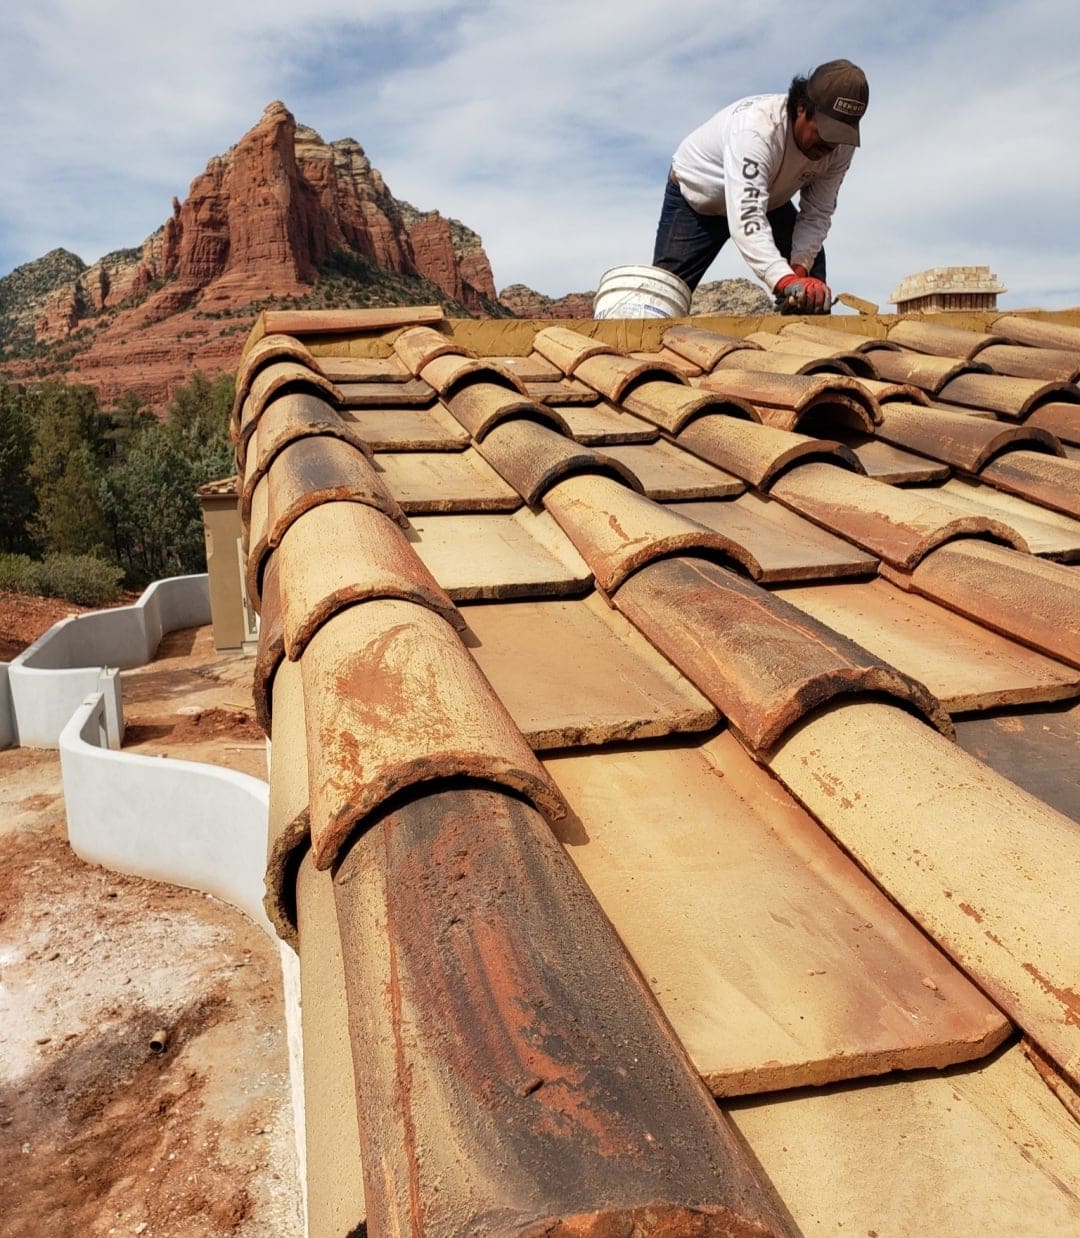 A McCormick Ranch roofer, deeply engrossed in perfecting the tile placement.